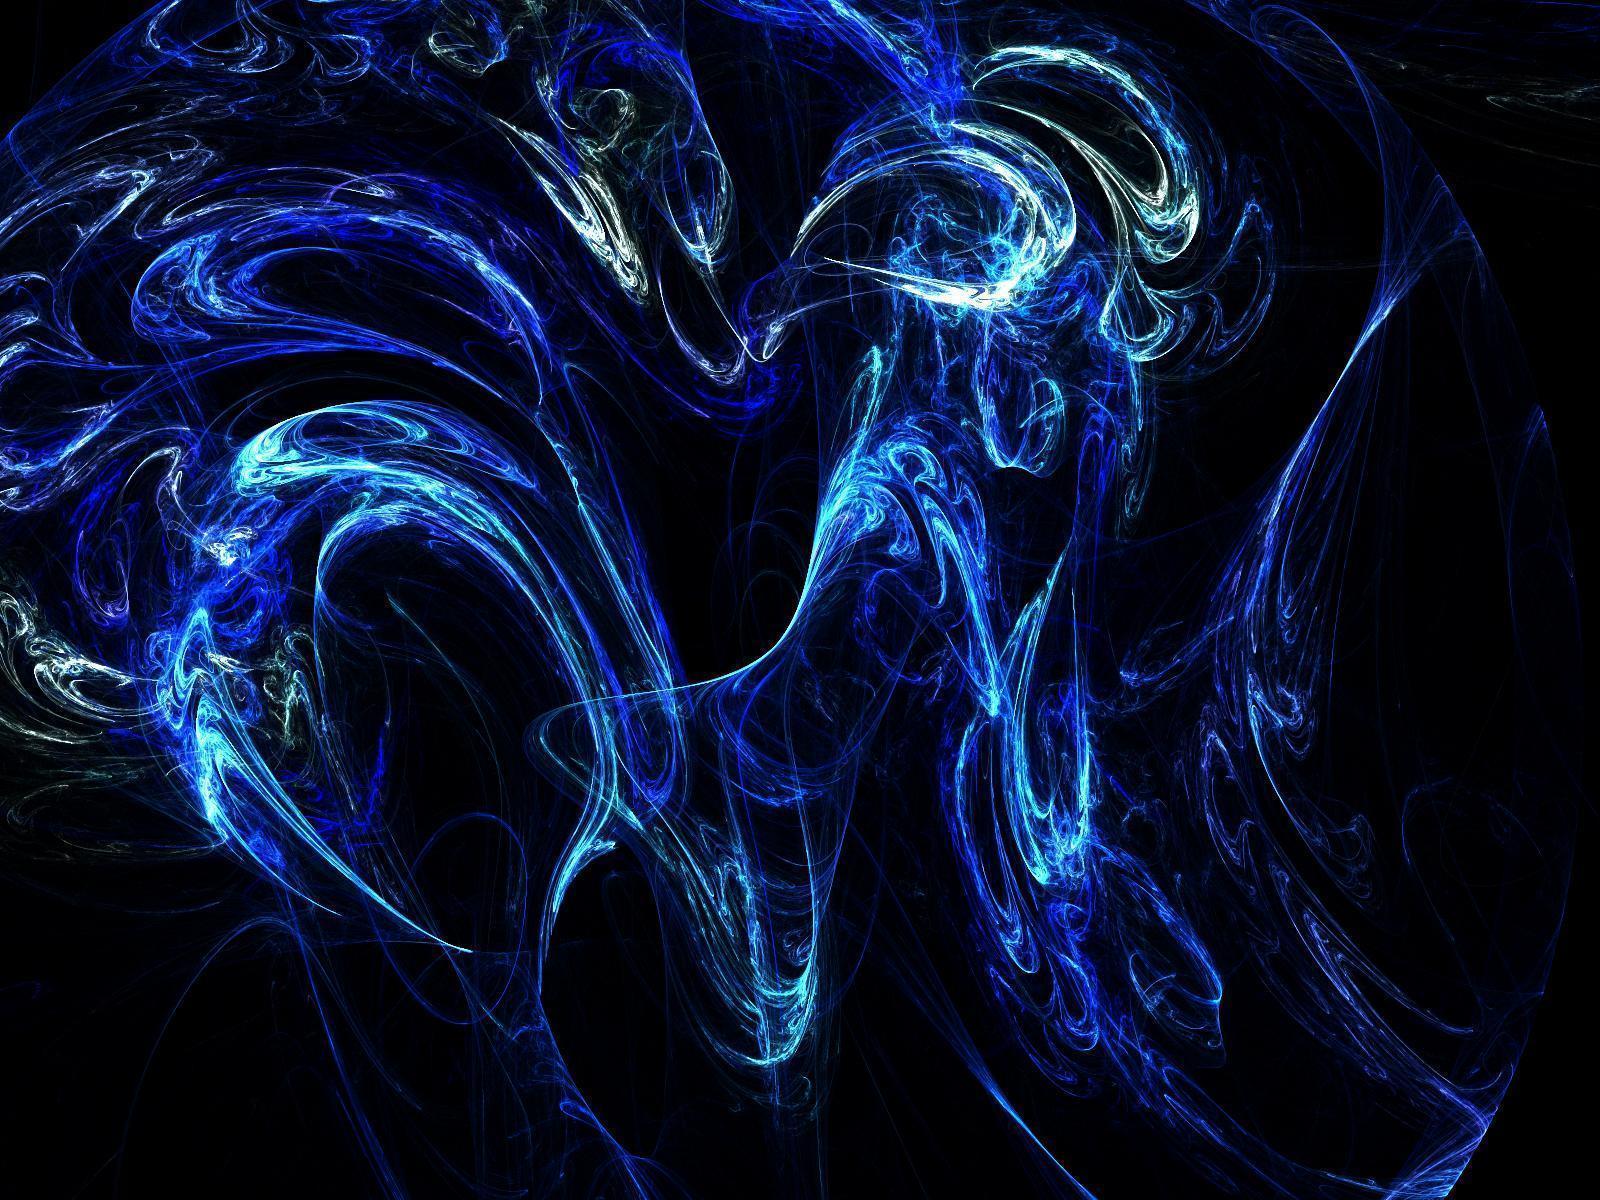 Neon wallpapers hd download free. 